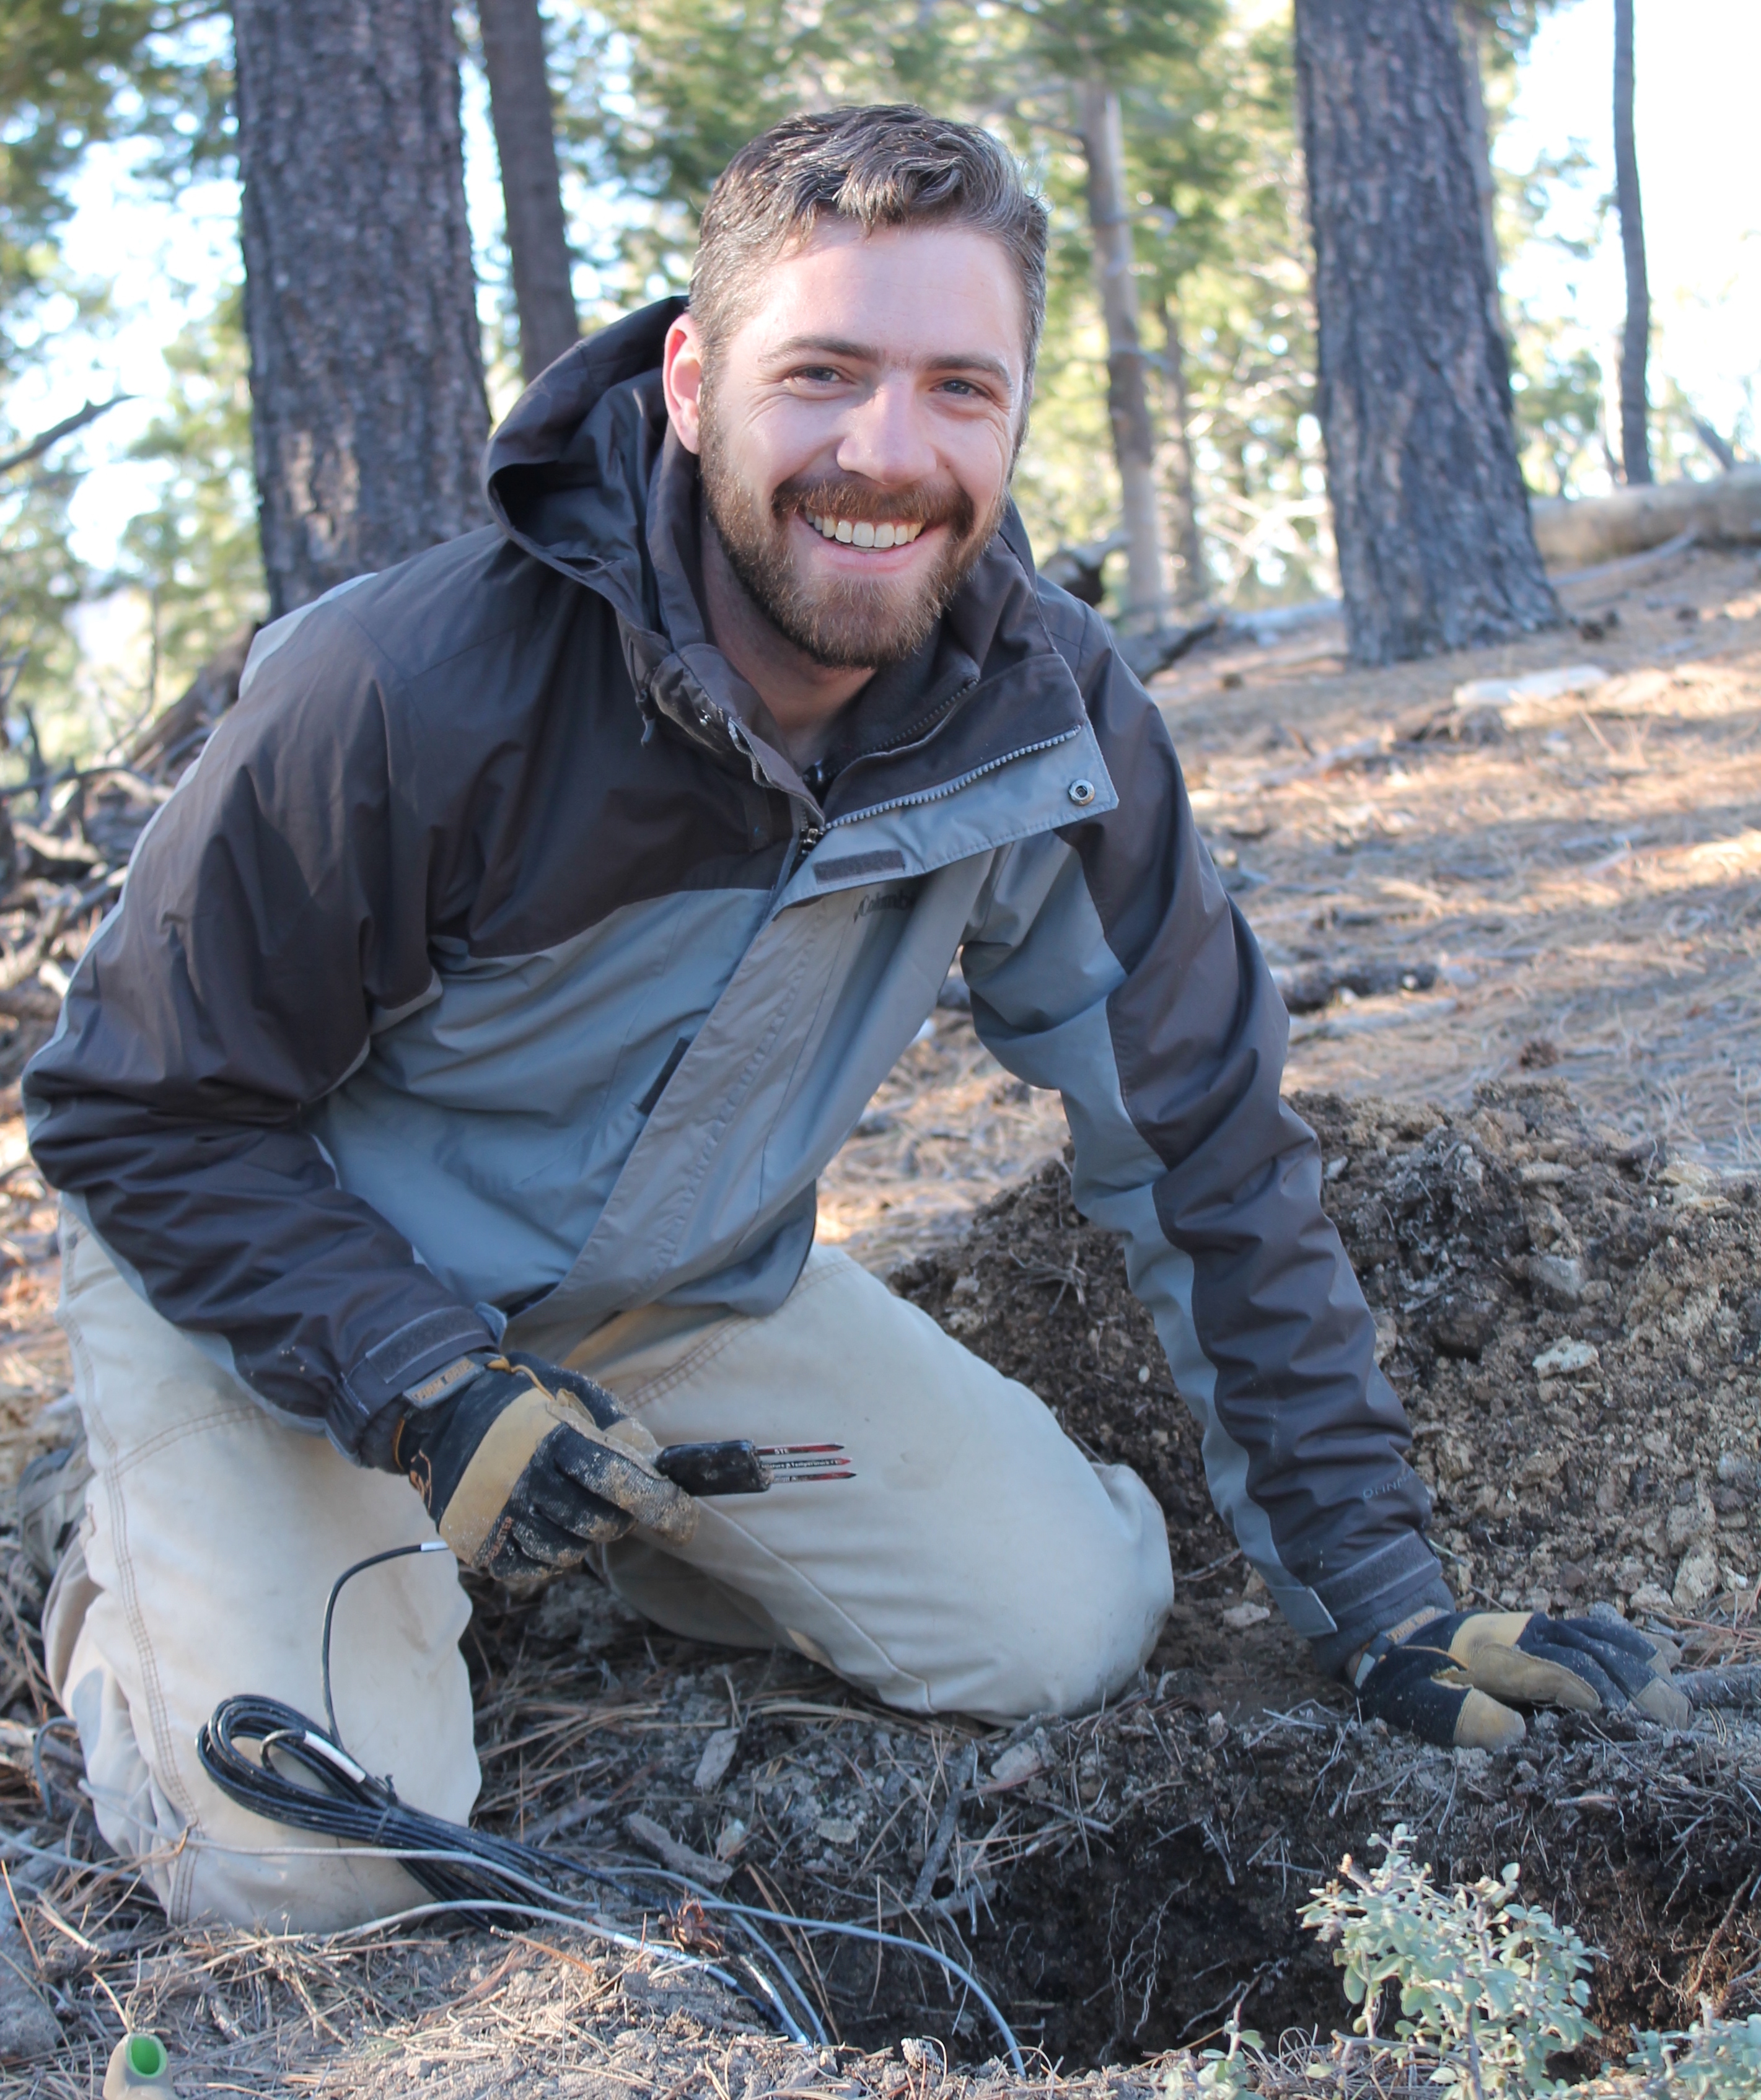 Patrick installing soil moisture probes at the Mt. Bigelow field site